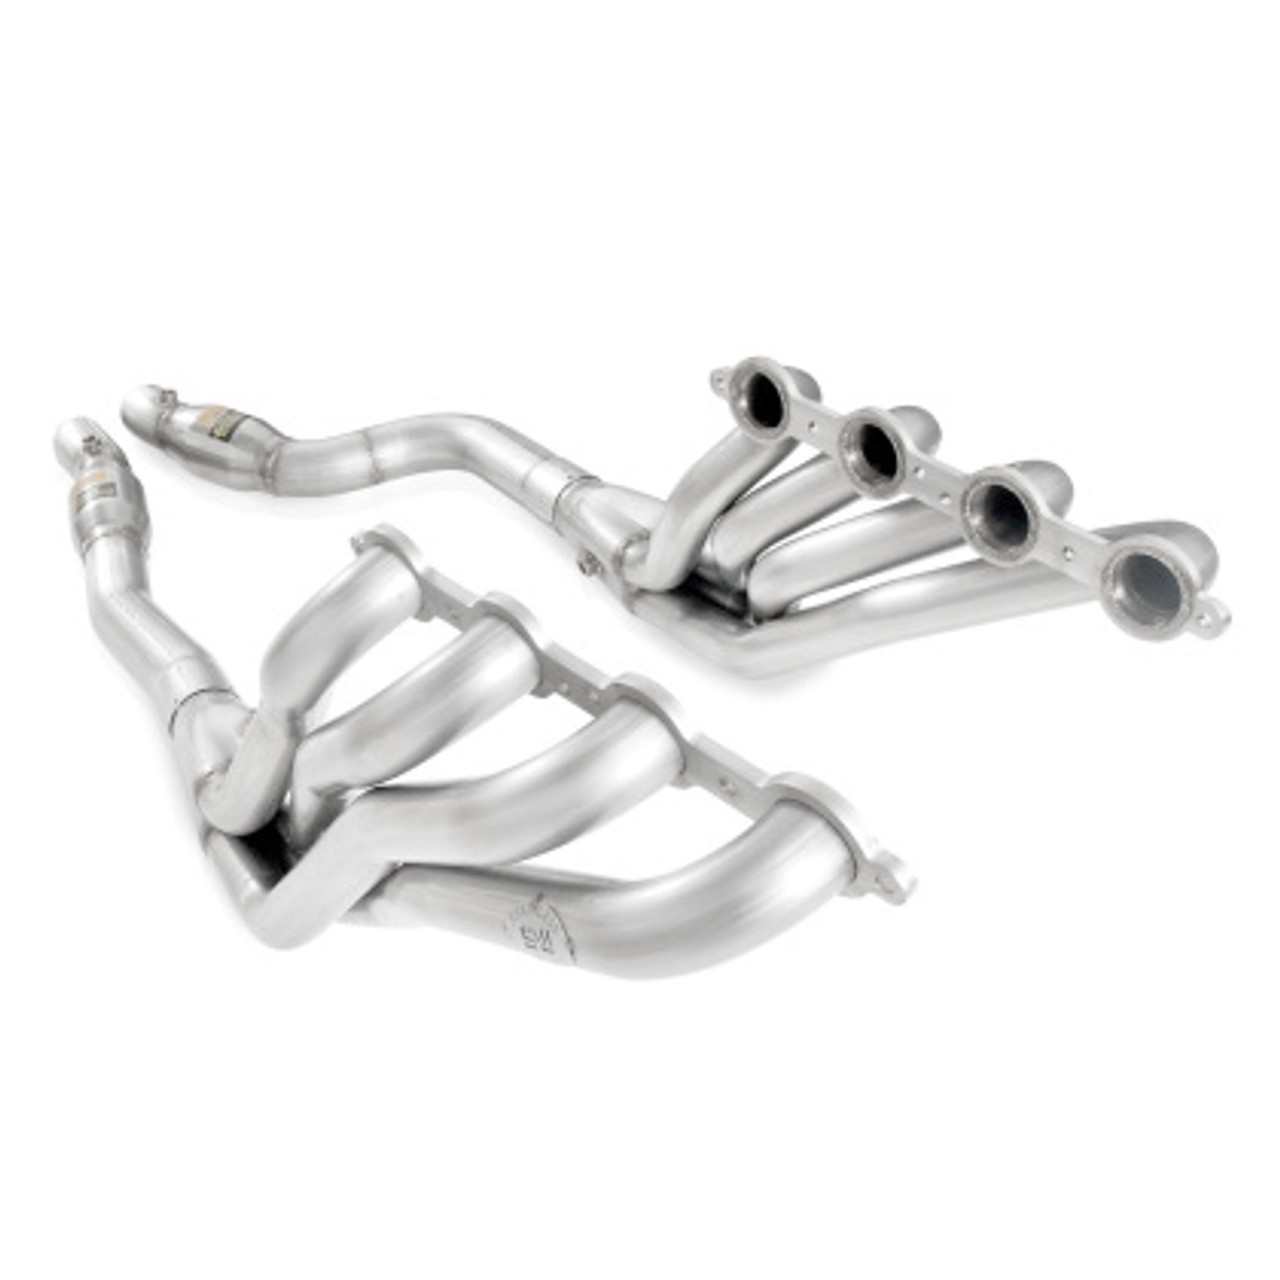 Stainless Works - CTS-V 09-15 Headers: 2" Catted - Performance Connect